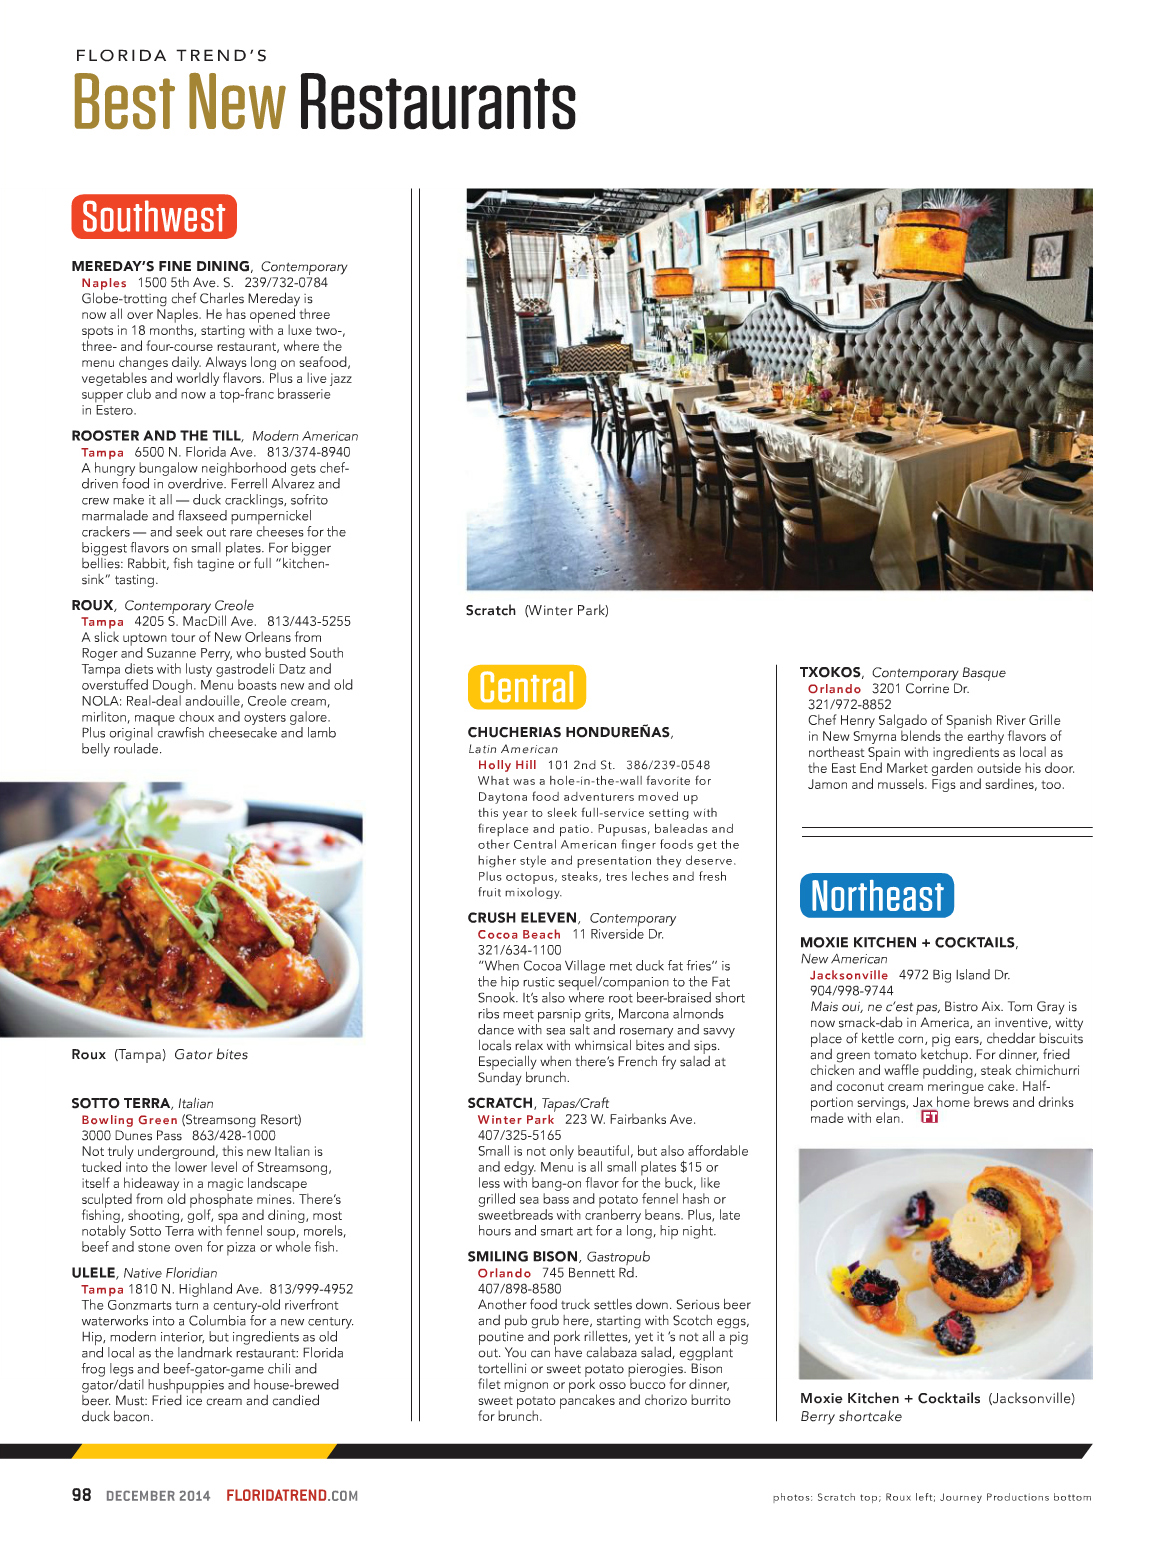 florida trend's best new restaurants, mereday's fine dining naples, rooster and the till tampa, roux tampa, sotto terra bowling green, ulele tampa, chucherias hondurenas holly hill, crush eleven cocoa beach, scratch winter park, smiling bison orlando, txokos orlando, moxie kitchen + cocktails jacksonville, 